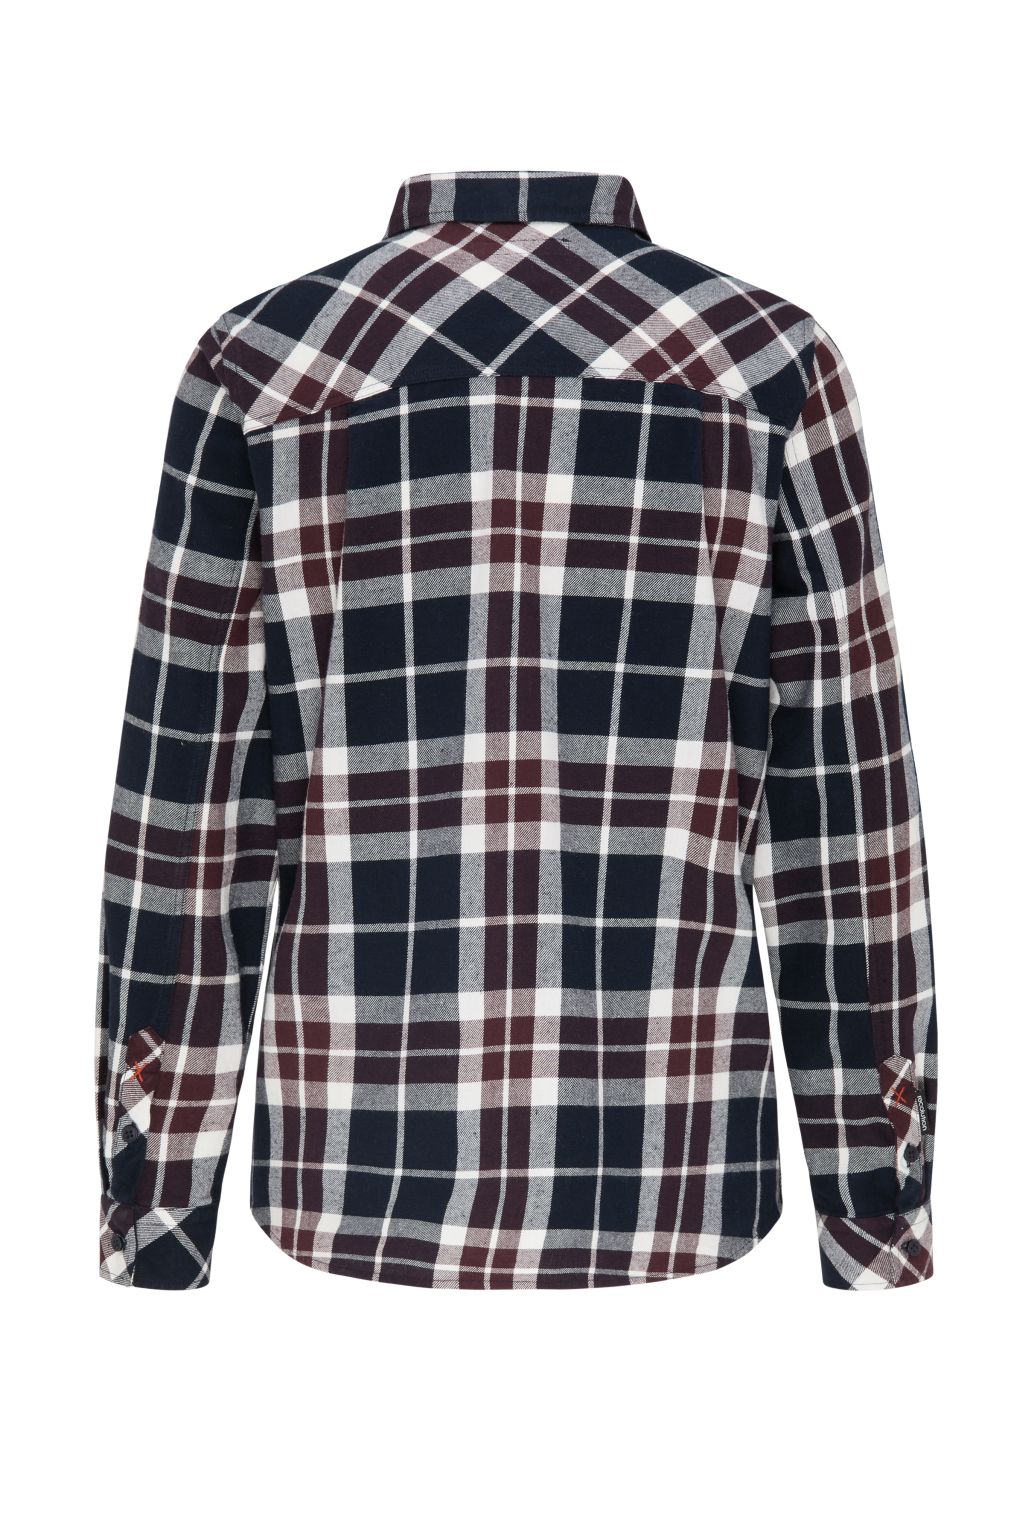 Frauen Flanell Shirt #Checked Red Checked XS